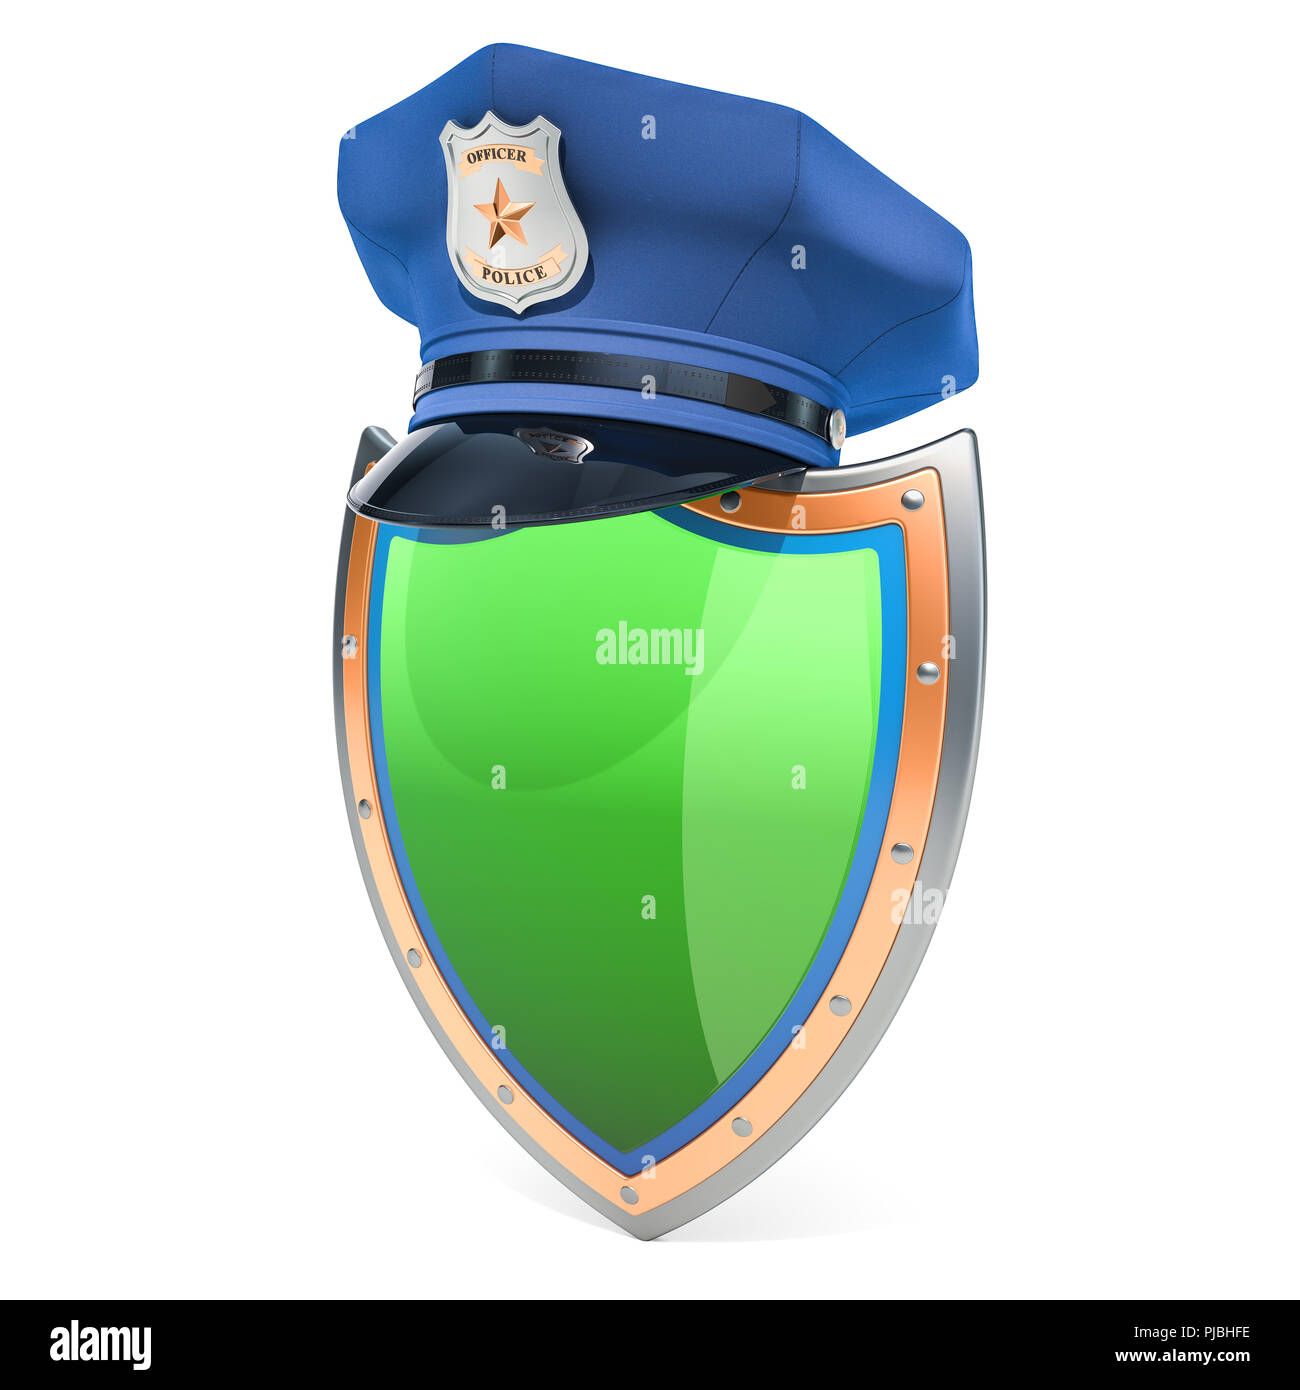 3,536 Police Patch Images, Stock Photos, 3D objects, & Vectors